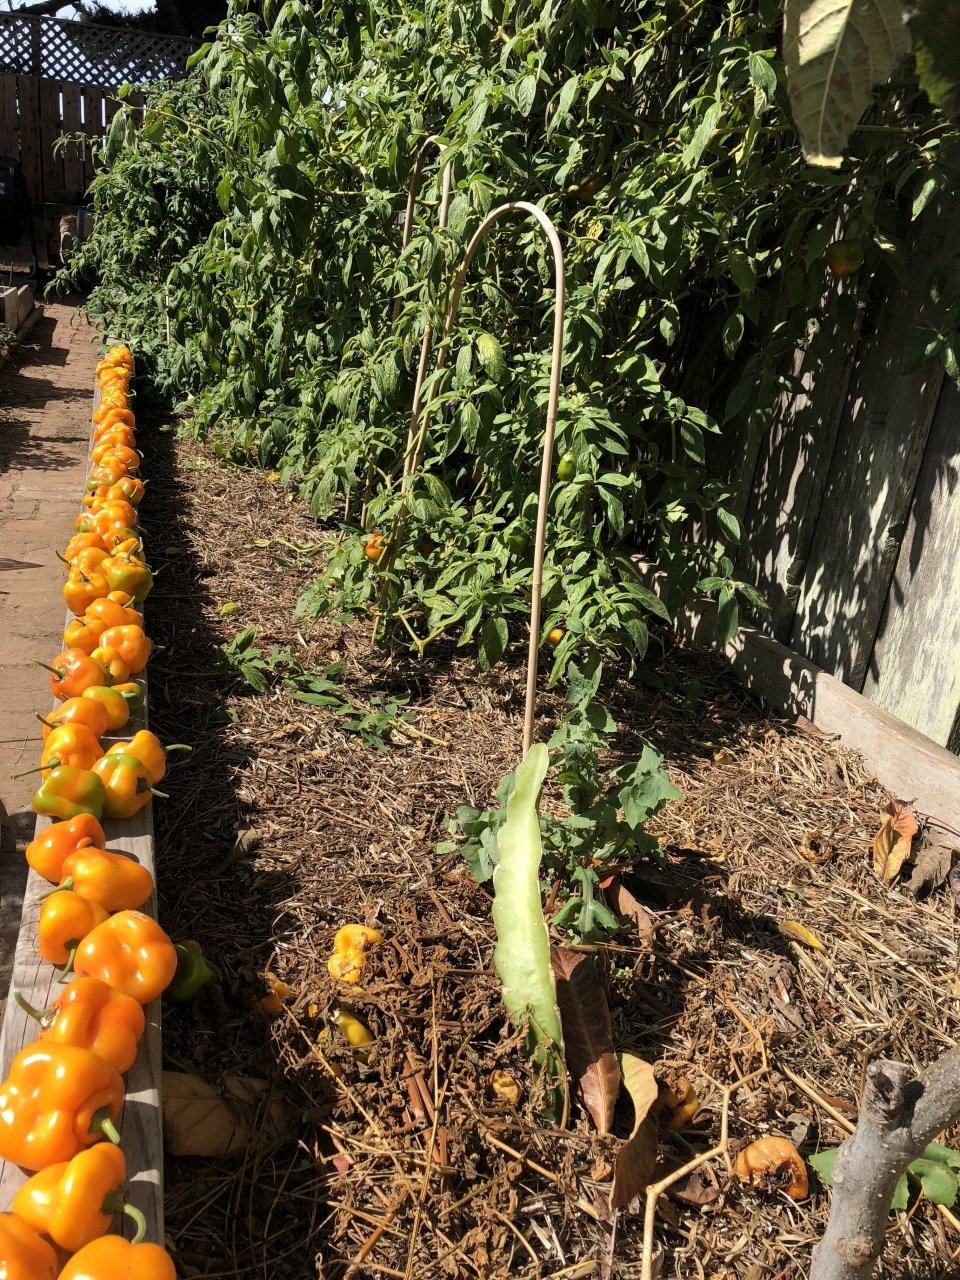 Harvest #6 - High Brix Manzano Peppers